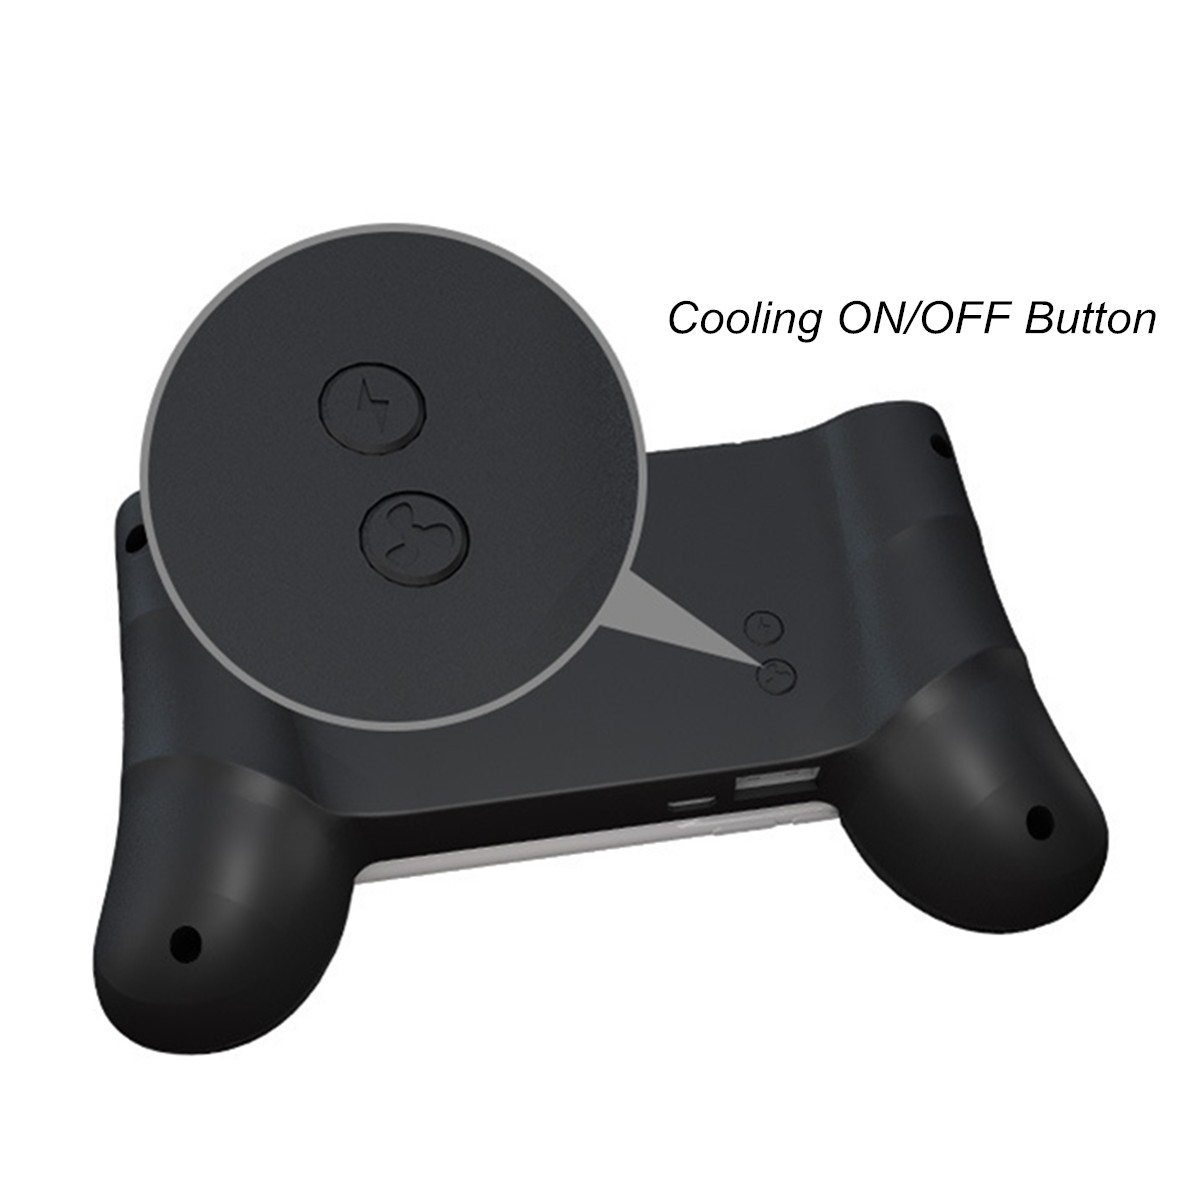 RK-Gaming-Controller-Touch-Screen-Mini-Wireless-Charging-Gamepad-Chargable-Joystick-With-Cooling-Fan-1638767-6